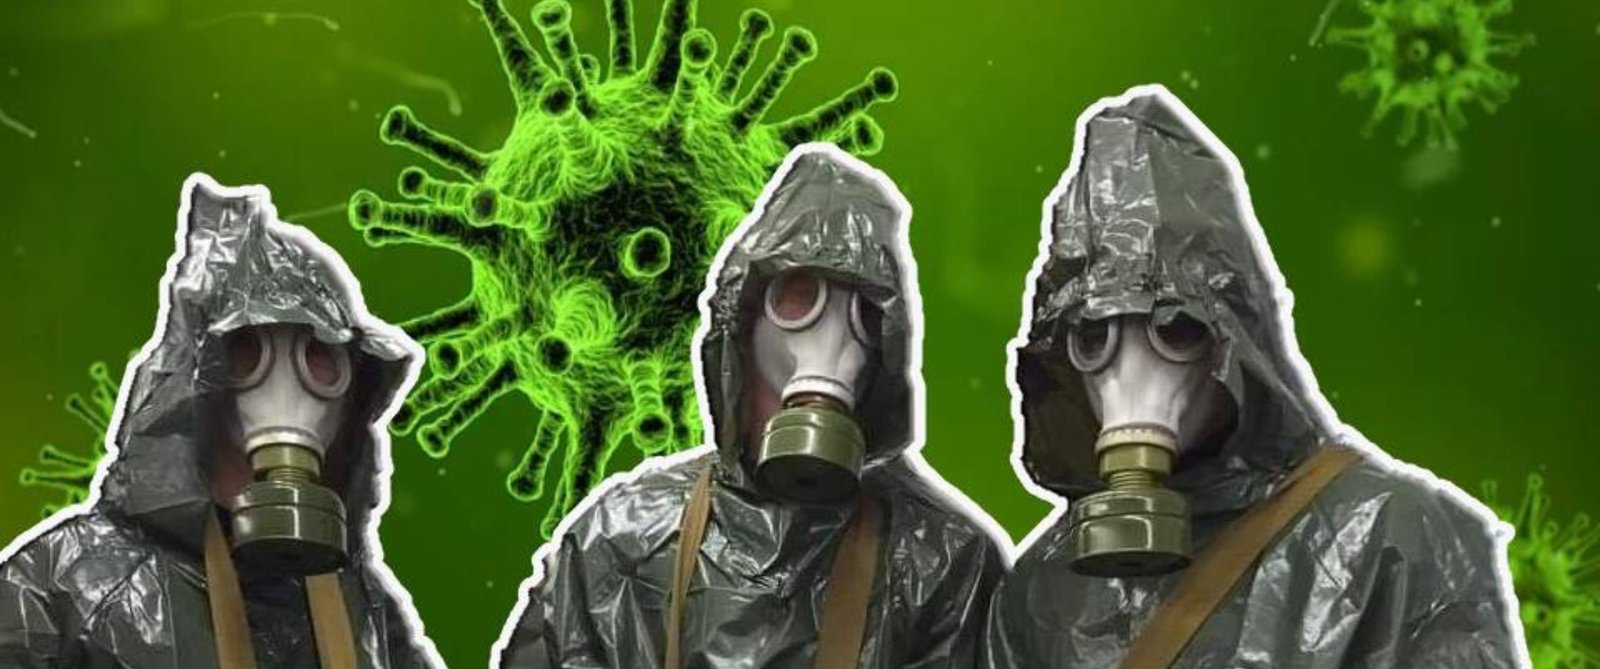 How to Verify eBay to the GP5 Masks for Asbestos?